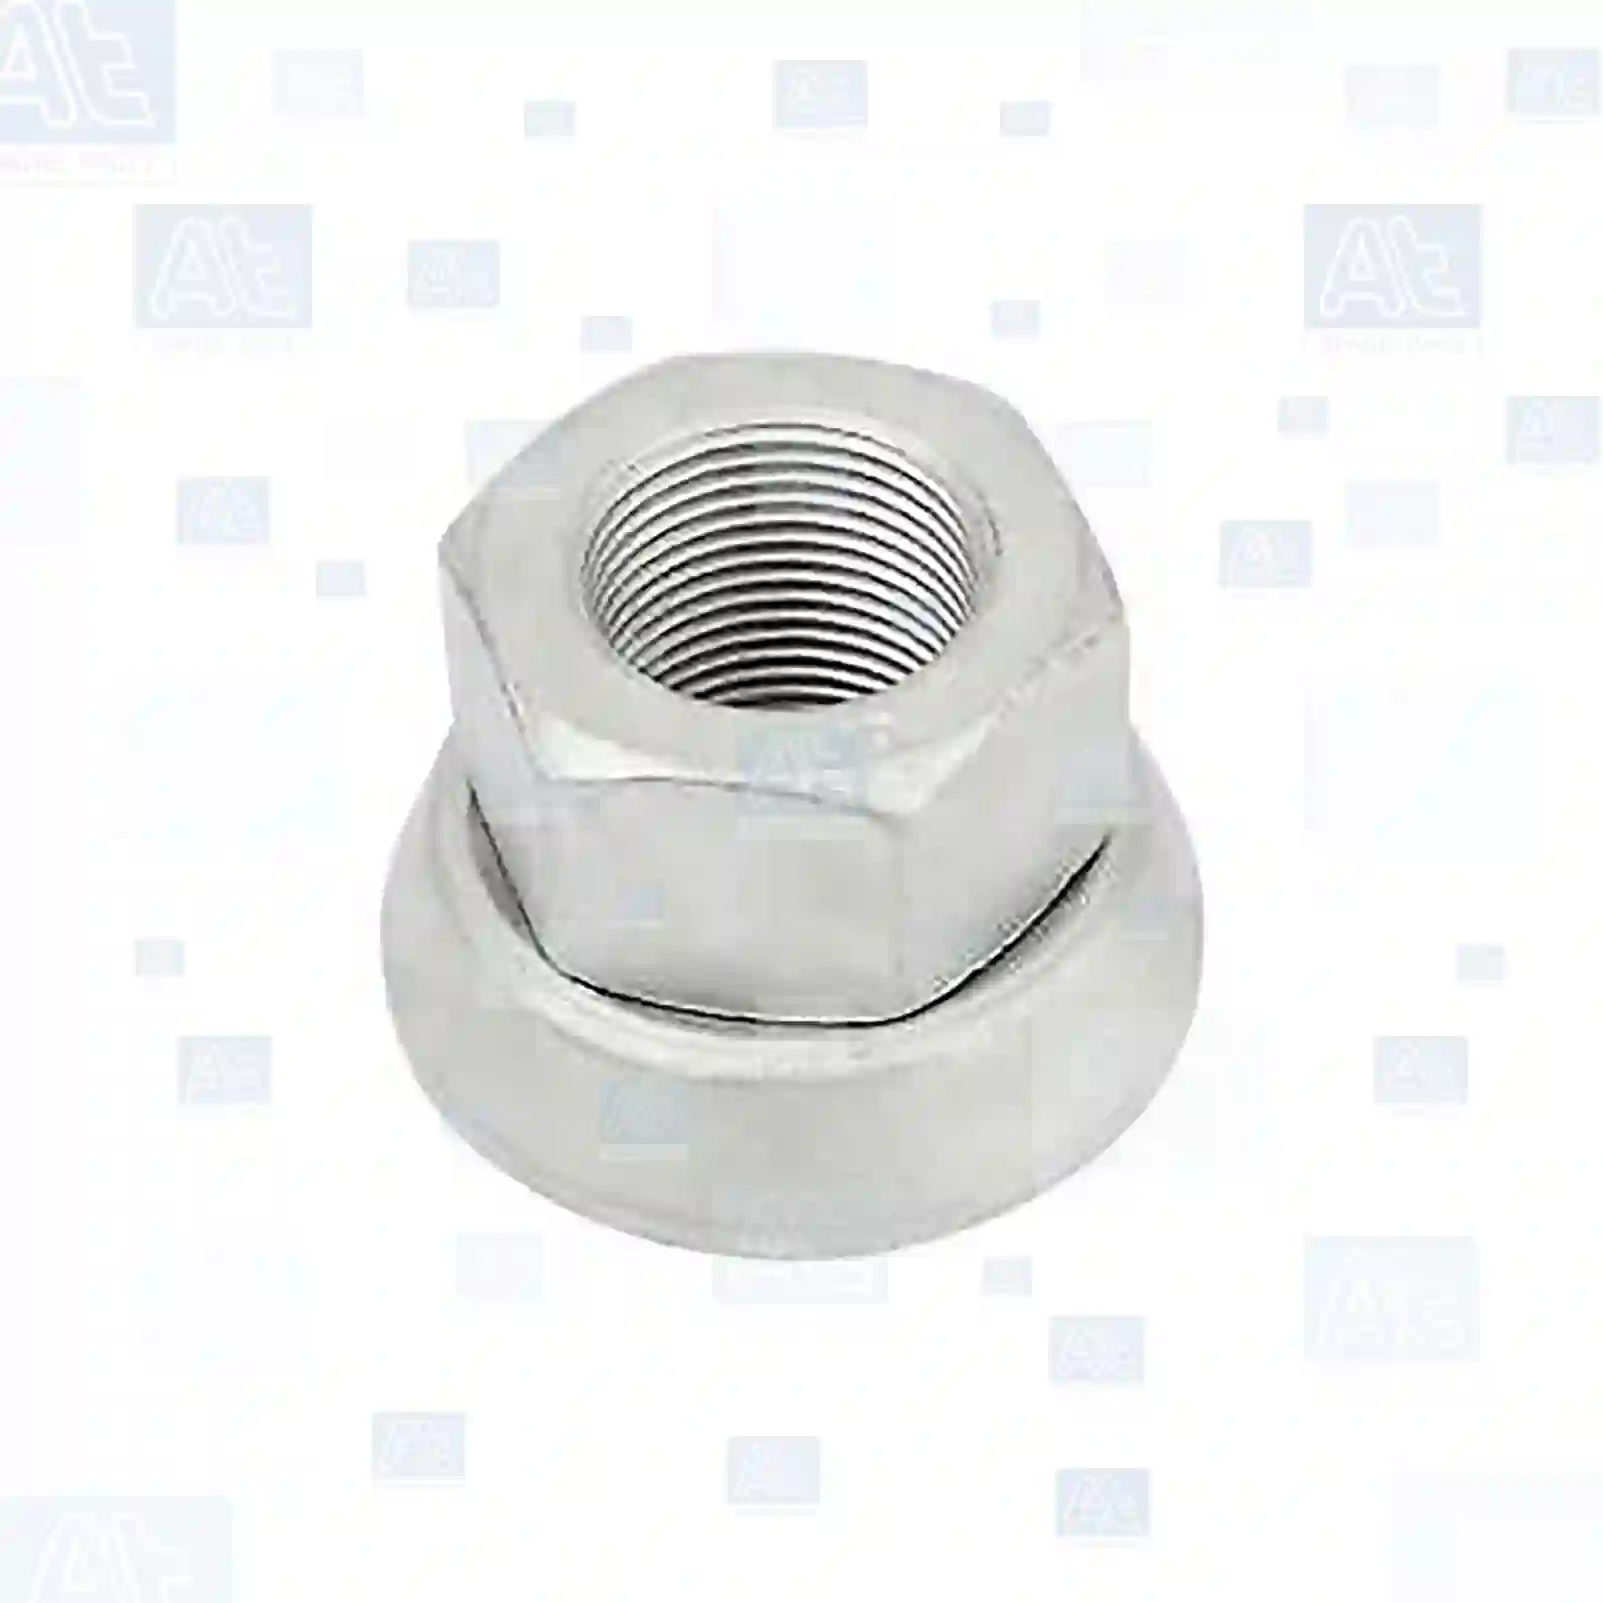 Wheel nut, 77726642, AJA0495001, M003141, 504294388, 5010393920, 5010457733, 5010556130, 0003156050, 0021623013, 0021623307, 0021623312, 5000029513, 5000471836, 5000471855, 5000471861, 5000543465, 5000545223, 5000556773, 5000604165, 5000605522, 5000653117, 5000786926, 5000788677, 5010097347, 5010262934, 5010262935, 5010457733, 7421303956, 2247301001, 6497000L, 7000016A, ZG41972-0008 ||  77726642 At Spare Part | Engine, Accelerator Pedal, Camshaft, Connecting Rod, Crankcase, Crankshaft, Cylinder Head, Engine Suspension Mountings, Exhaust Manifold, Exhaust Gas Recirculation, Filter Kits, Flywheel Housing, General Overhaul Kits, Engine, Intake Manifold, Oil Cleaner, Oil Cooler, Oil Filter, Oil Pump, Oil Sump, Piston & Liner, Sensor & Switch, Timing Case, Turbocharger, Cooling System, Belt Tensioner, Coolant Filter, Coolant Pipe, Corrosion Prevention Agent, Drive, Expansion Tank, Fan, Intercooler, Monitors & Gauges, Radiator, Thermostat, V-Belt / Timing belt, Water Pump, Fuel System, Electronical Injector Unit, Feed Pump, Fuel Filter, cpl., Fuel Gauge Sender,  Fuel Line, Fuel Pump, Fuel Tank, Injection Line Kit, Injection Pump, Exhaust System, Clutch & Pedal, Gearbox, Propeller Shaft, Axles, Brake System, Hubs & Wheels, Suspension, Leaf Spring, Universal Parts / Accessories, Steering, Electrical System, Cabin Wheel nut, 77726642, AJA0495001, M003141, 504294388, 5010393920, 5010457733, 5010556130, 0003156050, 0021623013, 0021623307, 0021623312, 5000029513, 5000471836, 5000471855, 5000471861, 5000543465, 5000545223, 5000556773, 5000604165, 5000605522, 5000653117, 5000786926, 5000788677, 5010097347, 5010262934, 5010262935, 5010457733, 7421303956, 2247301001, 6497000L, 7000016A, ZG41972-0008 ||  77726642 At Spare Part | Engine, Accelerator Pedal, Camshaft, Connecting Rod, Crankcase, Crankshaft, Cylinder Head, Engine Suspension Mountings, Exhaust Manifold, Exhaust Gas Recirculation, Filter Kits, Flywheel Housing, General Overhaul Kits, Engine, Intake Manifold, Oil Cleaner, Oil Cooler, Oil Filter, Oil Pump, Oil Sump, Piston & Liner, Sensor & Switch, Timing Case, Turbocharger, Cooling System, Belt Tensioner, Coolant Filter, Coolant Pipe, Corrosion Prevention Agent, Drive, Expansion Tank, Fan, Intercooler, Monitors & Gauges, Radiator, Thermostat, V-Belt / Timing belt, Water Pump, Fuel System, Electronical Injector Unit, Feed Pump, Fuel Filter, cpl., Fuel Gauge Sender,  Fuel Line, Fuel Pump, Fuel Tank, Injection Line Kit, Injection Pump, Exhaust System, Clutch & Pedal, Gearbox, Propeller Shaft, Axles, Brake System, Hubs & Wheels, Suspension, Leaf Spring, Universal Parts / Accessories, Steering, Electrical System, Cabin